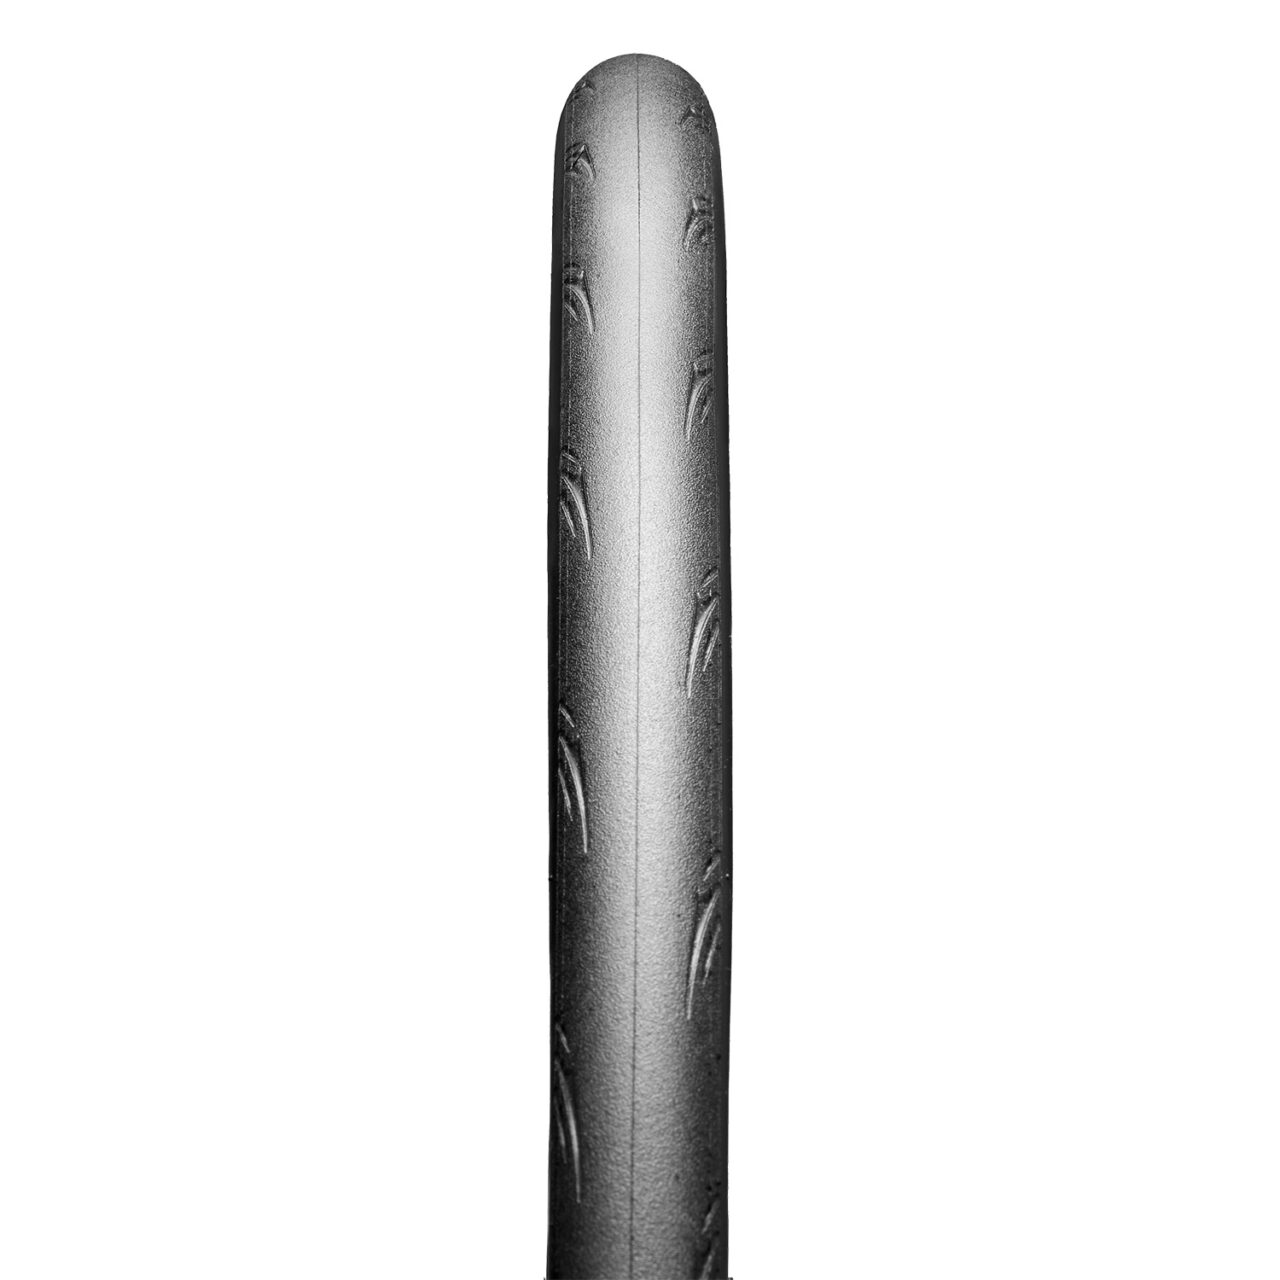 Maxxis Pursuer bicycle tire tread